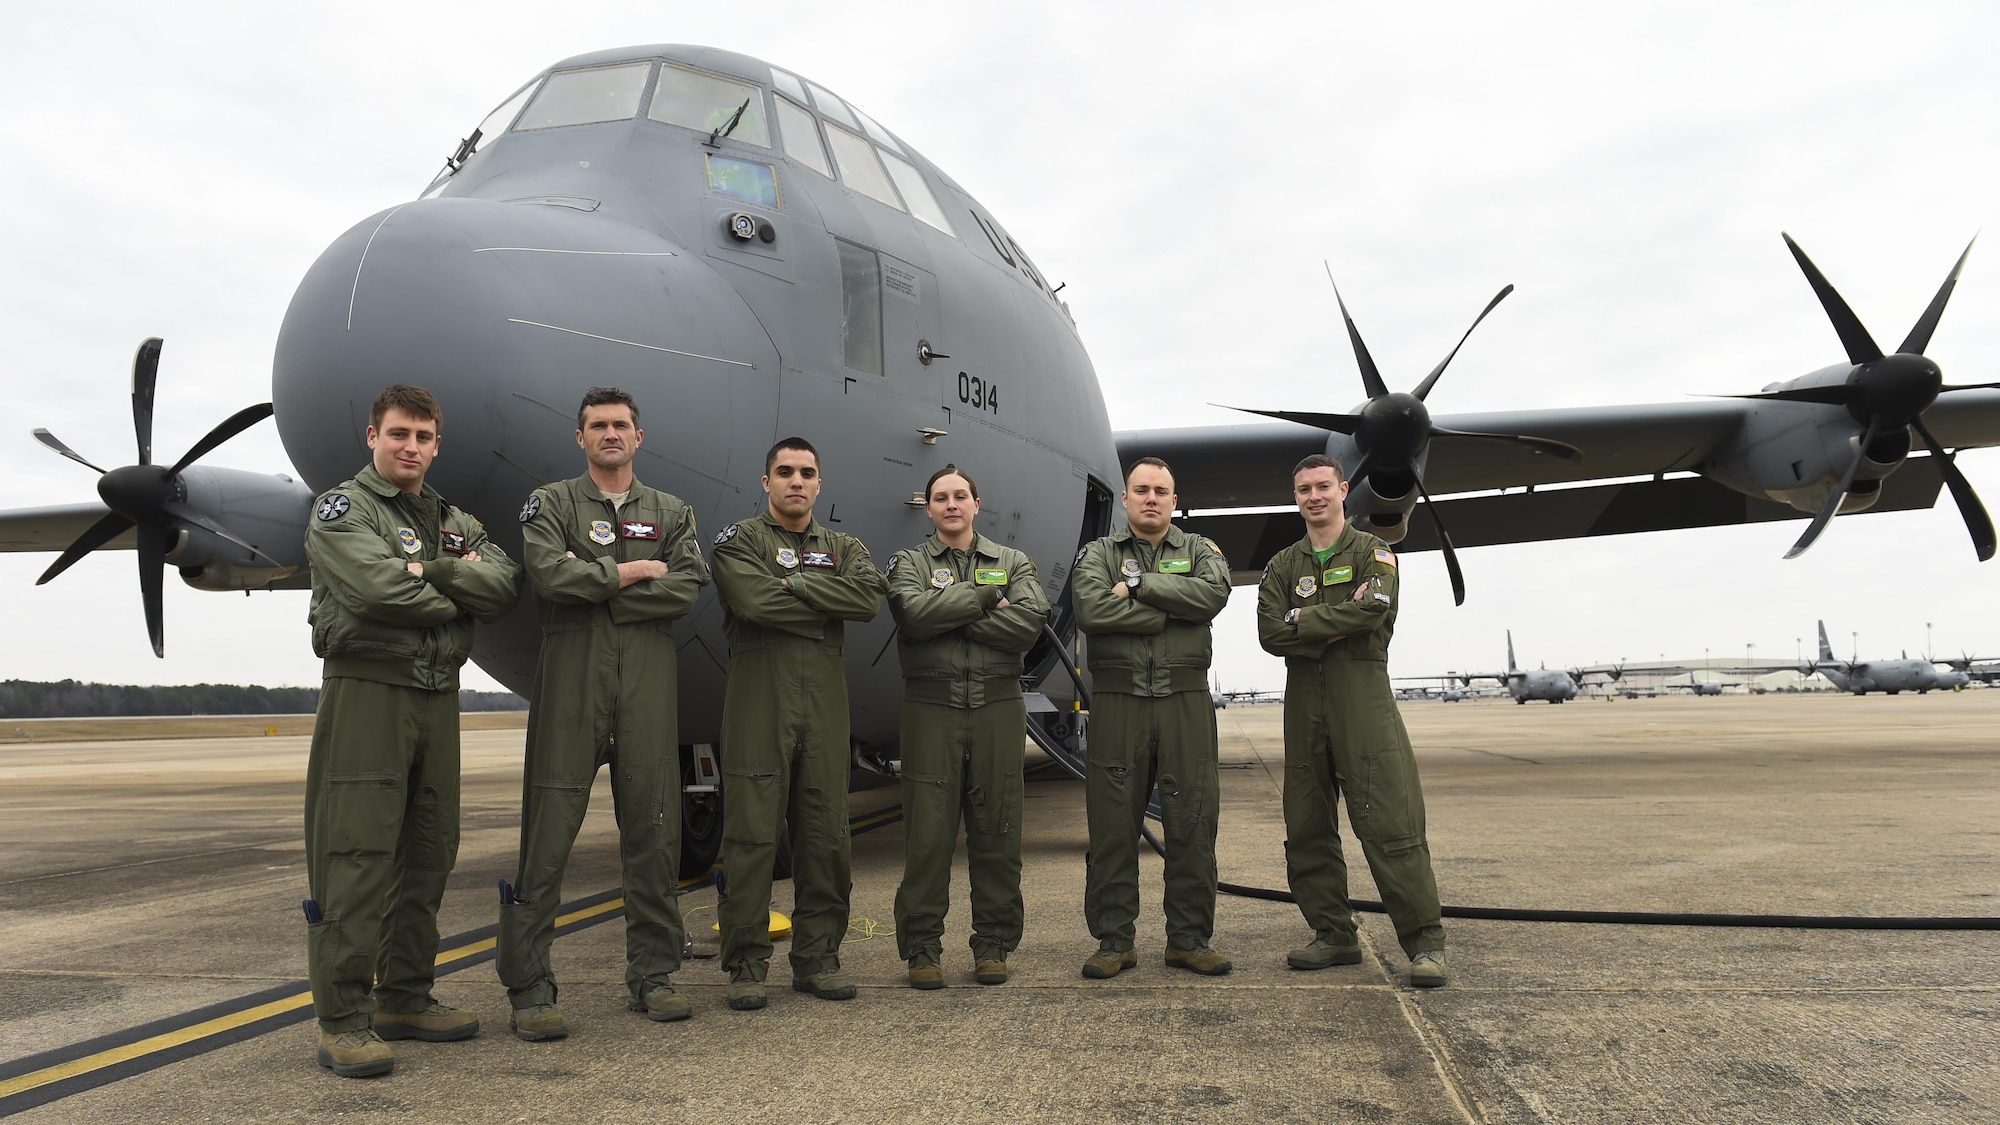 U.S. Air Force Airmen from the 61st Airlift Squadron and 41st Airlift Squadron prepare for their first flight in a C-130J with Block 8.1 enhancement upgrades Feb. 3, 2017, at Little Rock Air Force Base, Ark. The upgrades were installed by Lockheed Martin and improve communications, navigation, surveillance/air traffic management and more. (U.S. Air Force photo/Senior Airman Harry Brexel)